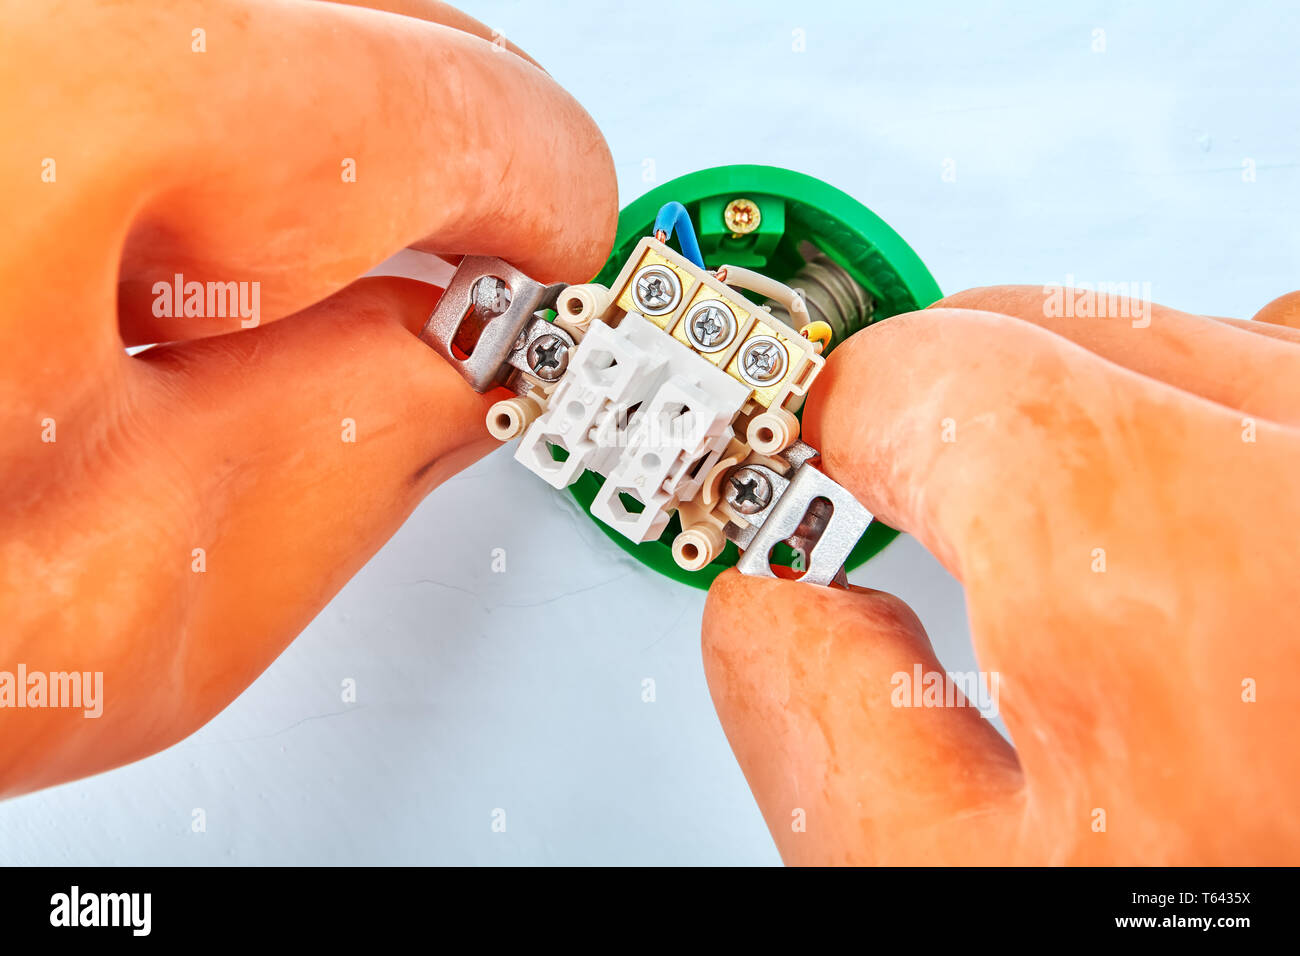 Electrician in protective gloves is installing double switch placed in the socket. Stock Photo